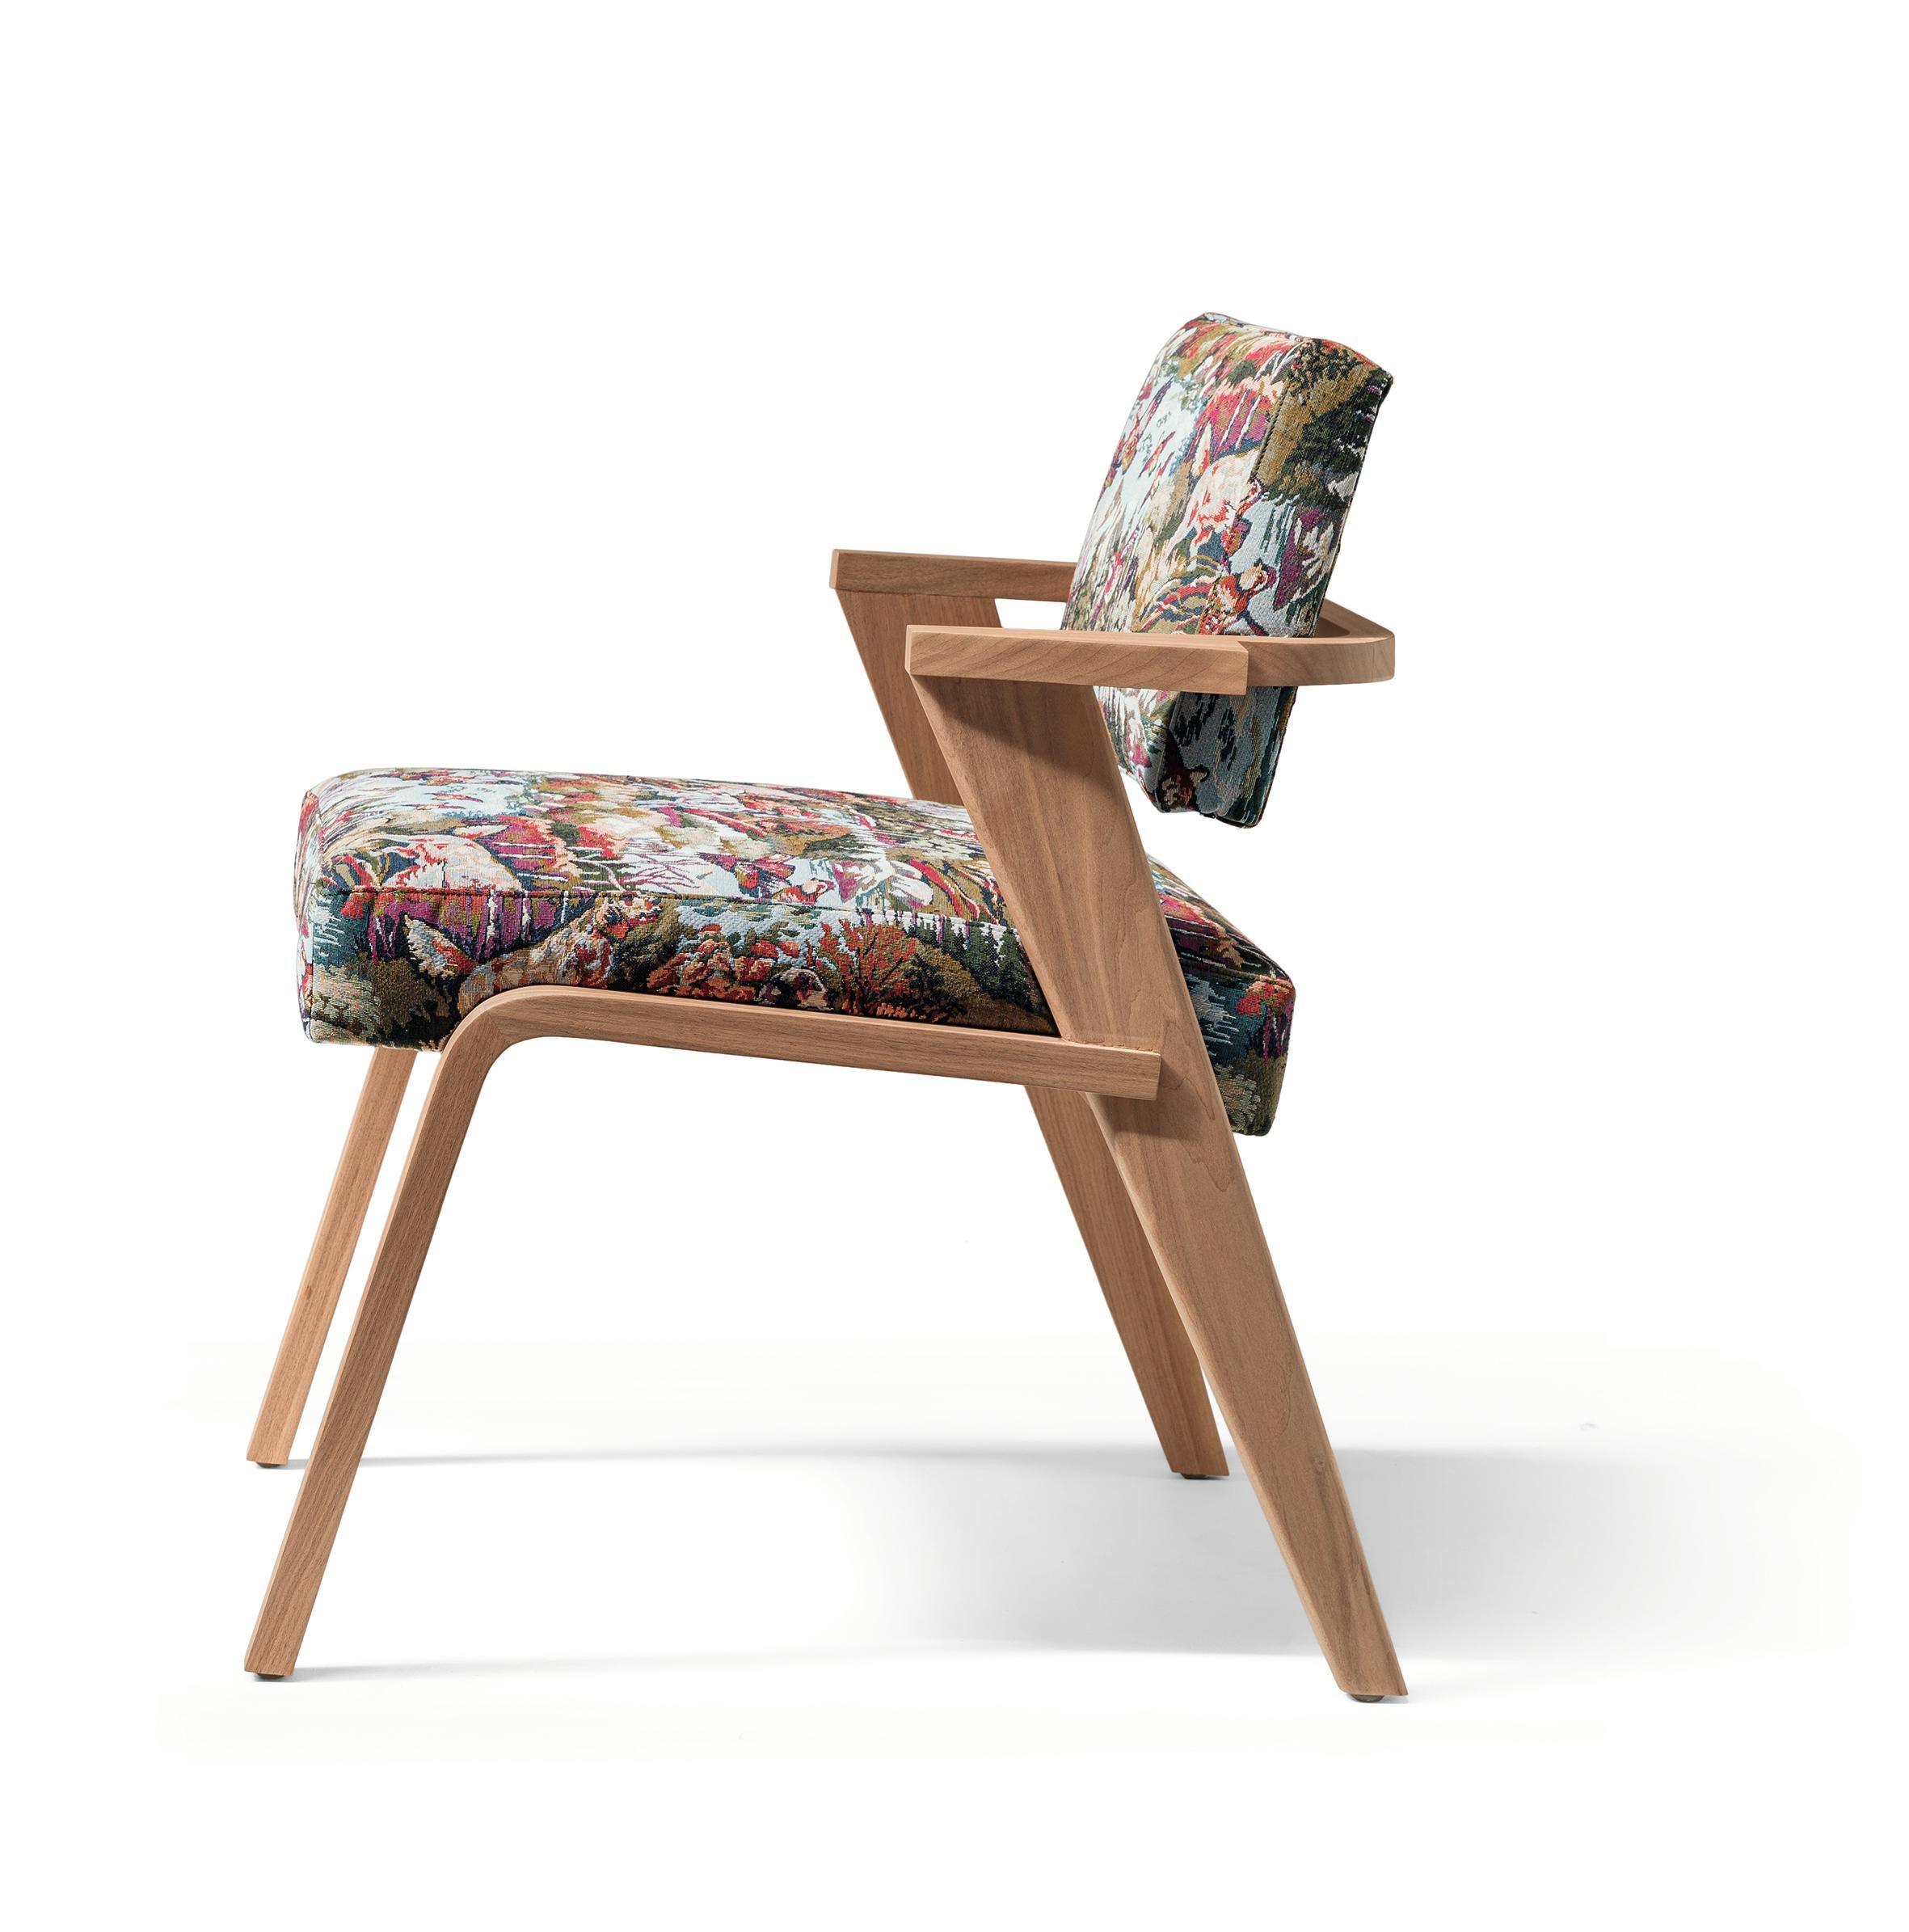 NOCINA/D Dining Armchair in Matt Solid Canaletto Walnut and Hunting Dogs Fabric In New Condition For Sale In Lentate sul Seveso, Monza e Brianza